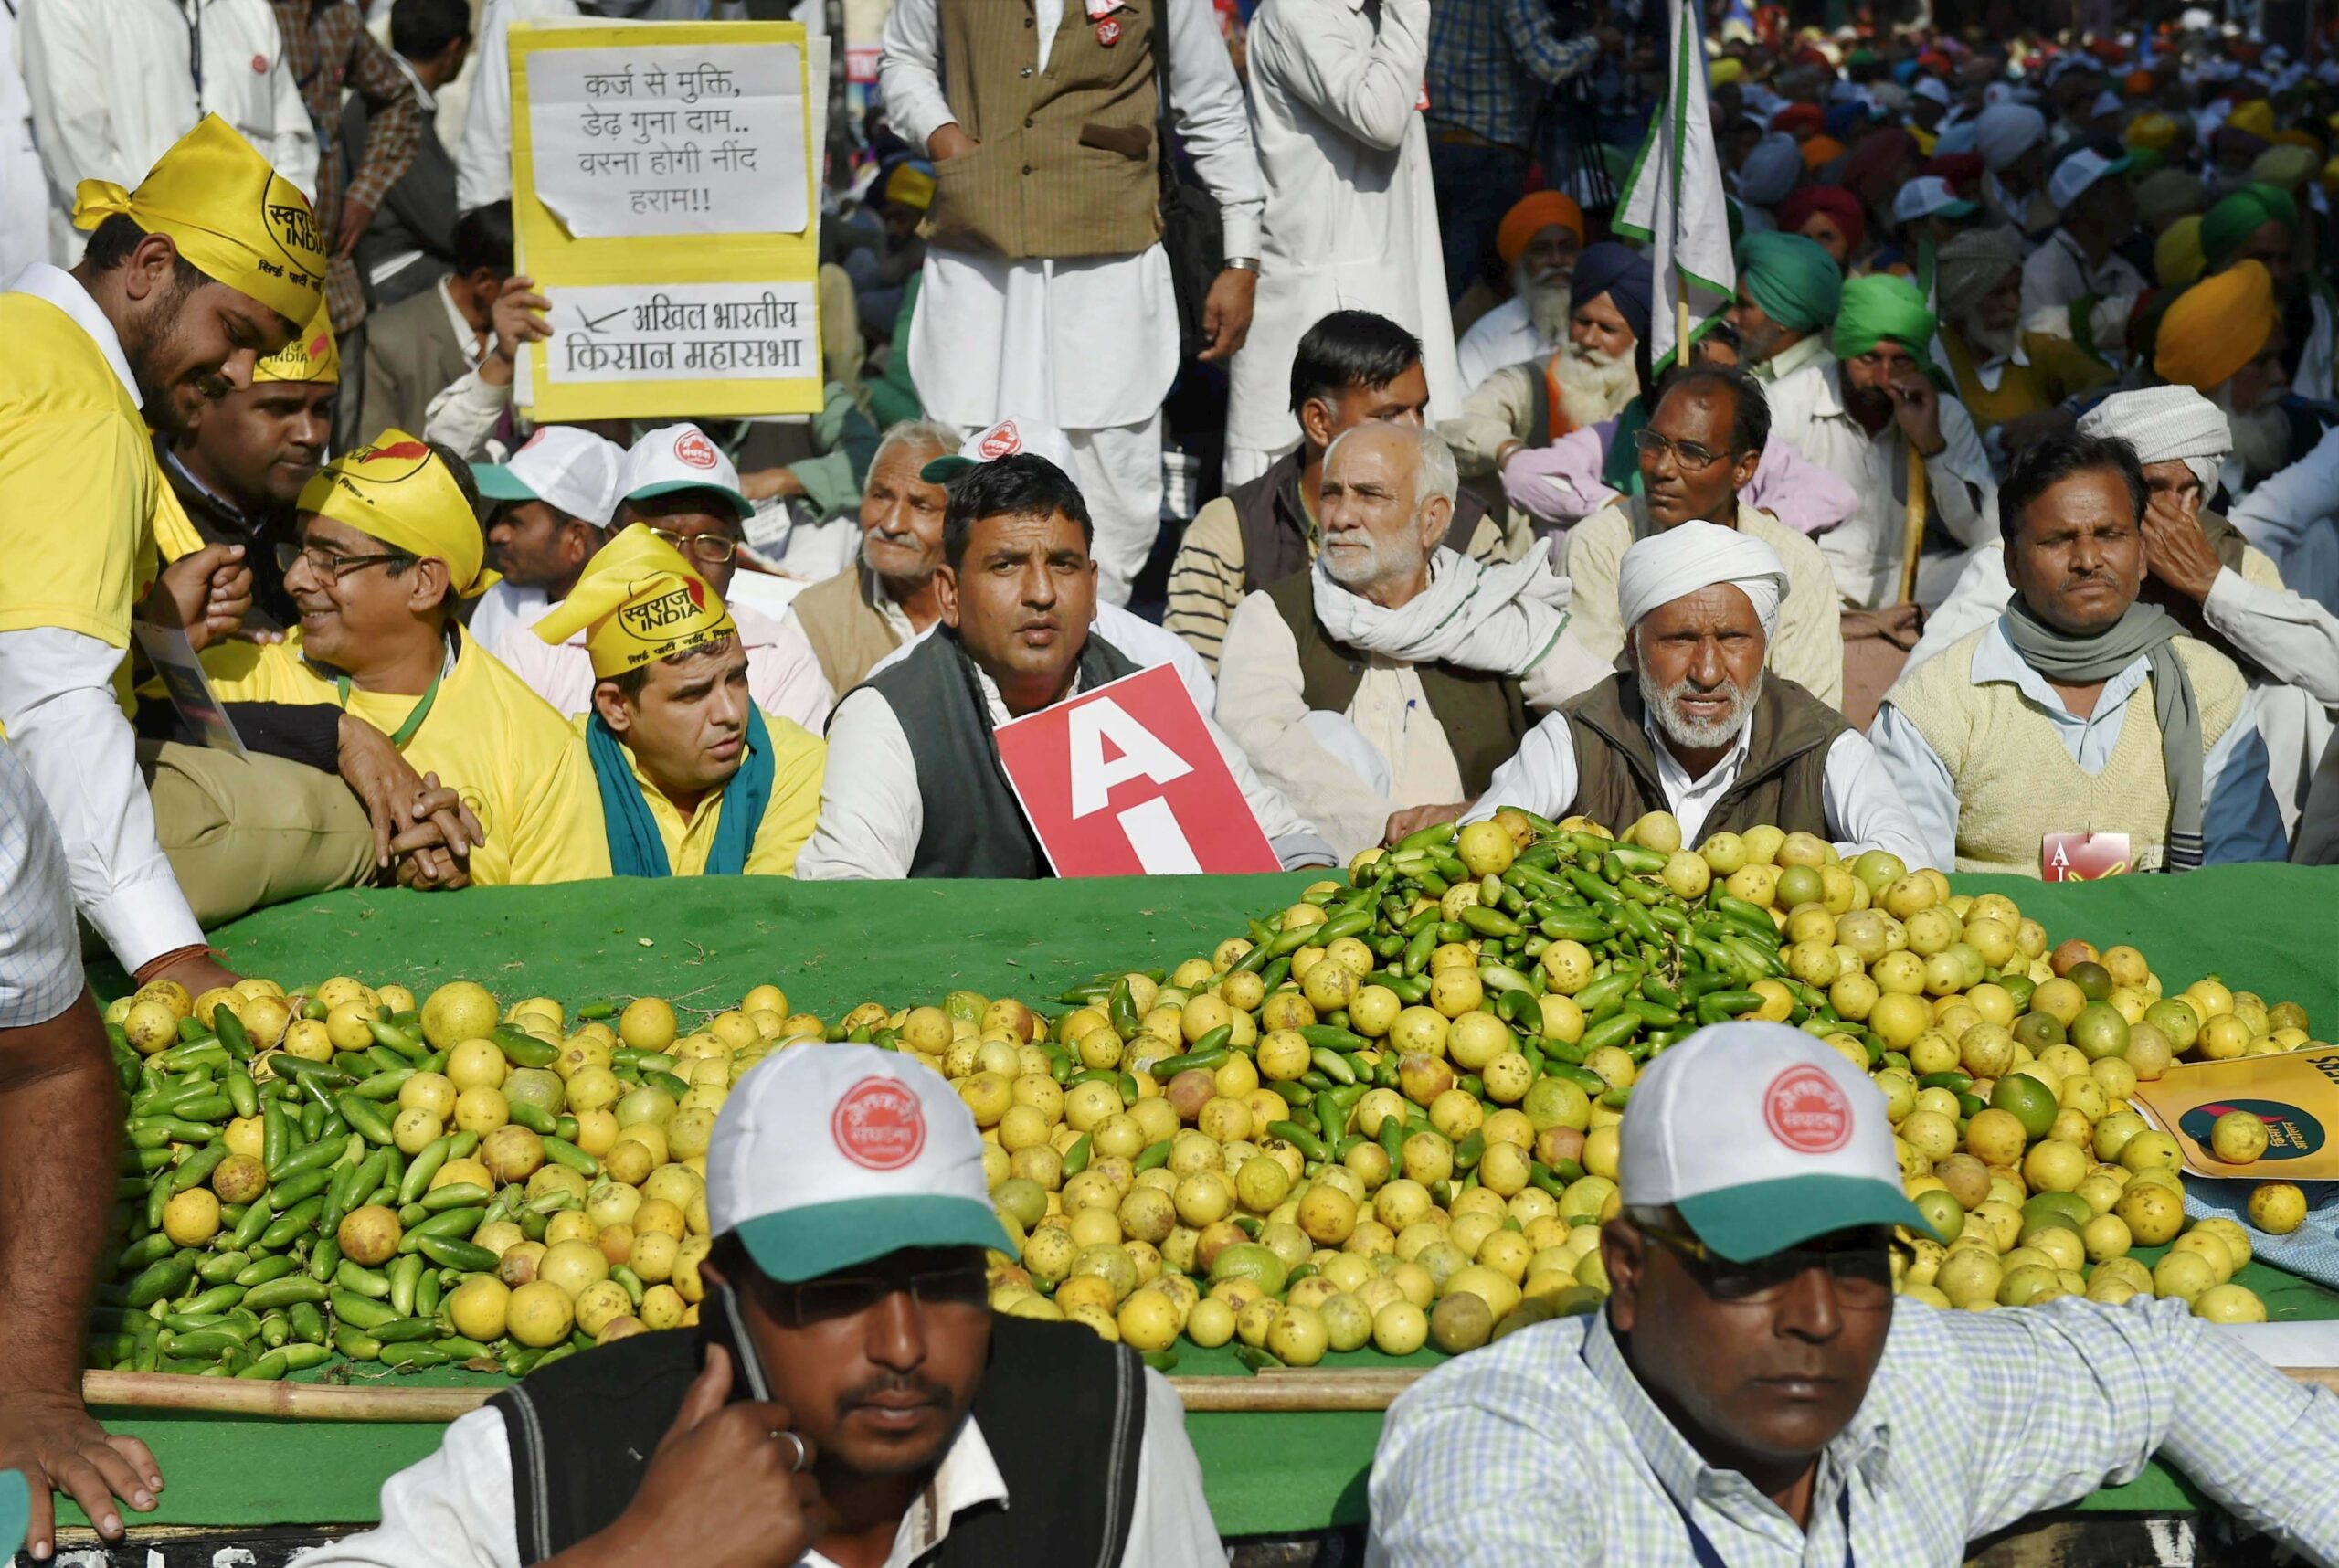 New Delhi: Farmers display fruits and vegetables at the Kisan Mukti Sansad, organised to highlight the farmers' issues, in New Delhi on Monday. PTI Photo by Atul Yadav  (PTI11_20_2017_000103B)